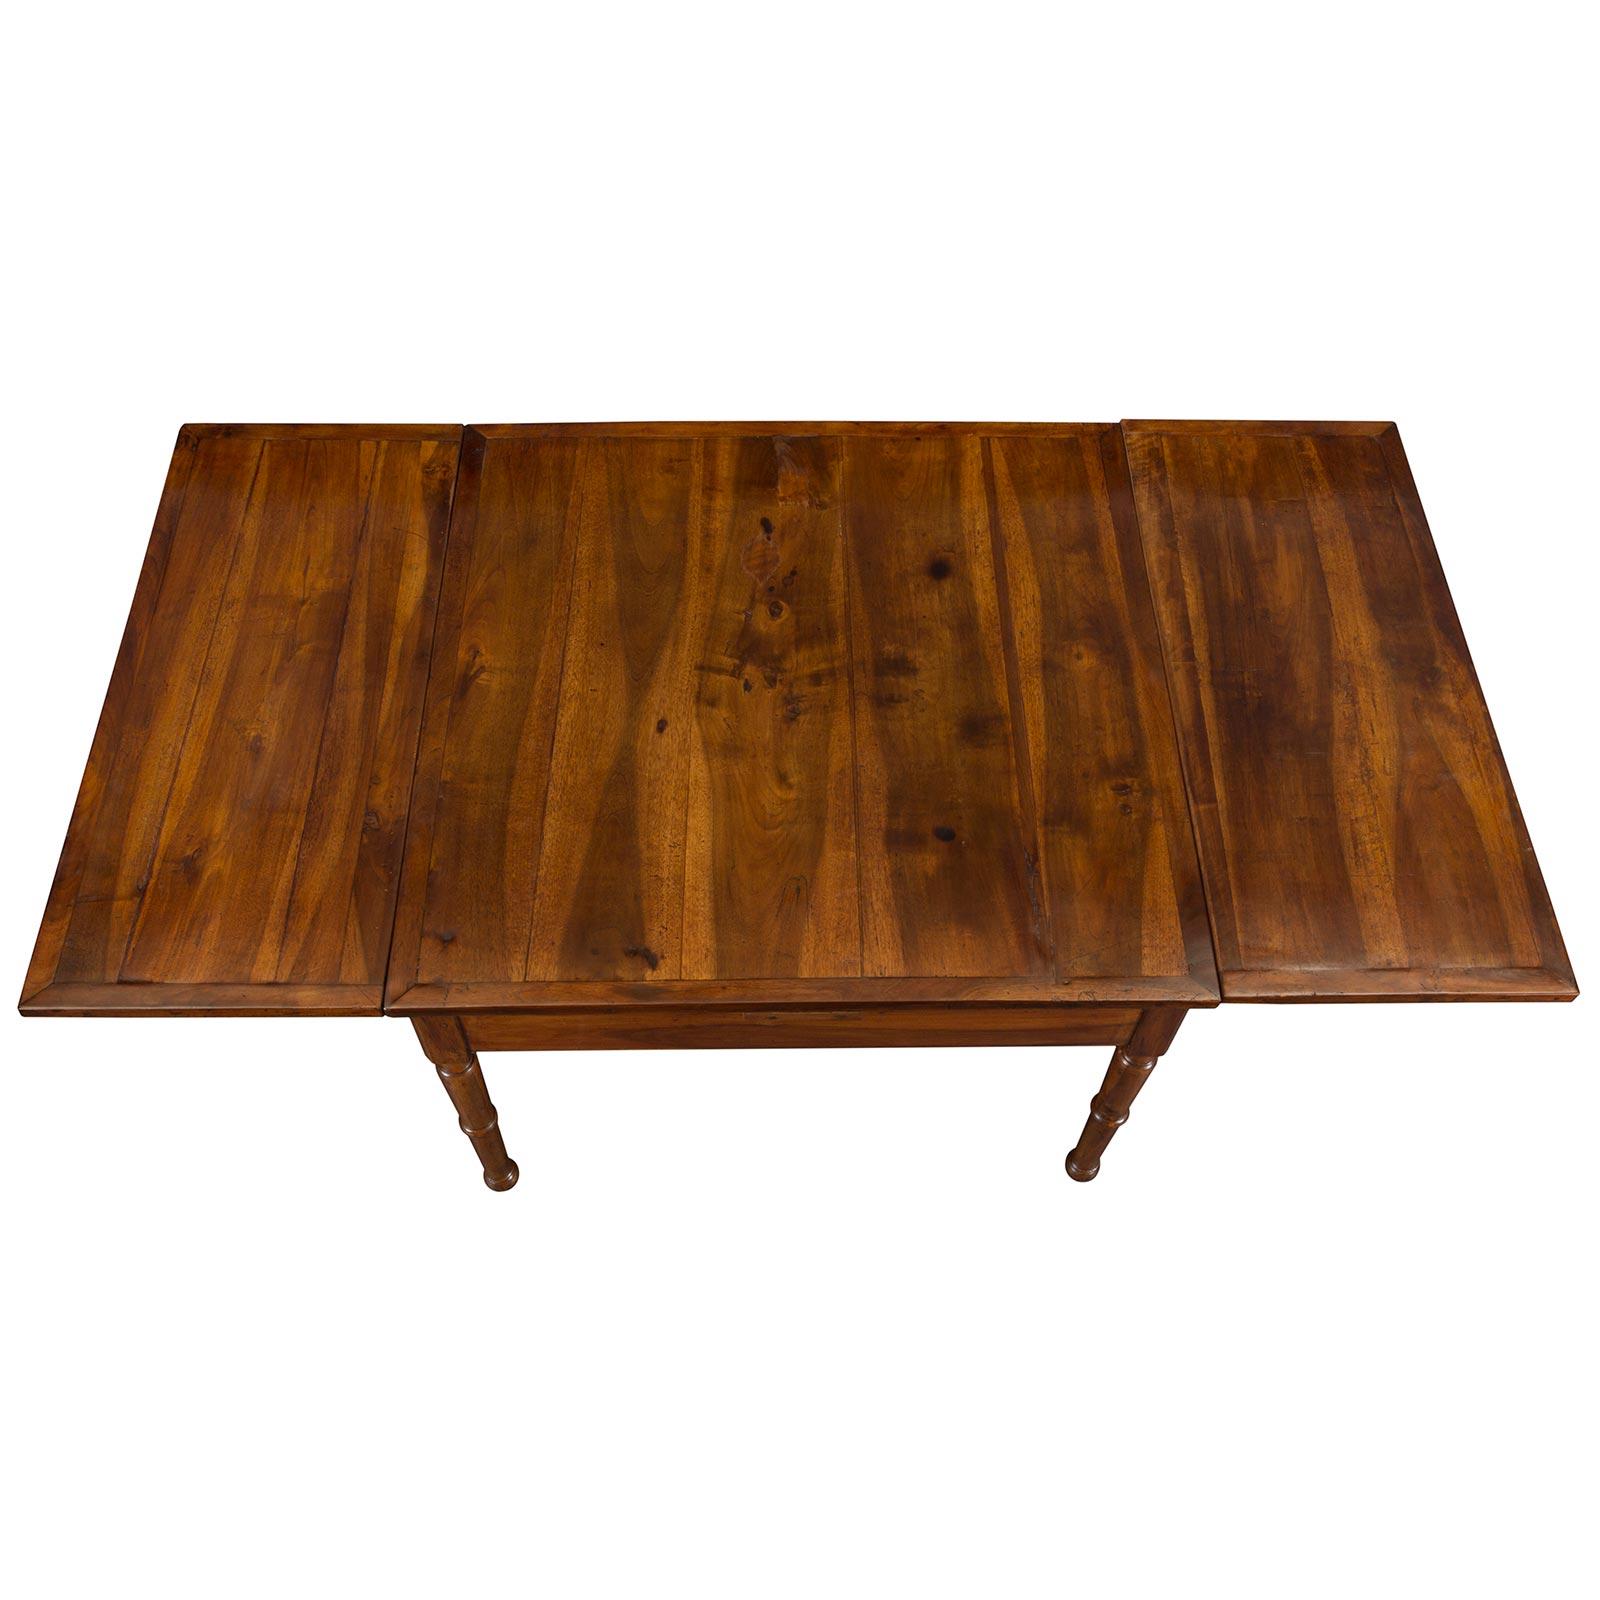 Italian 18th Century Louis XVI Period Walnut Center/Dining Table In Good Condition For Sale In West Palm Beach, FL